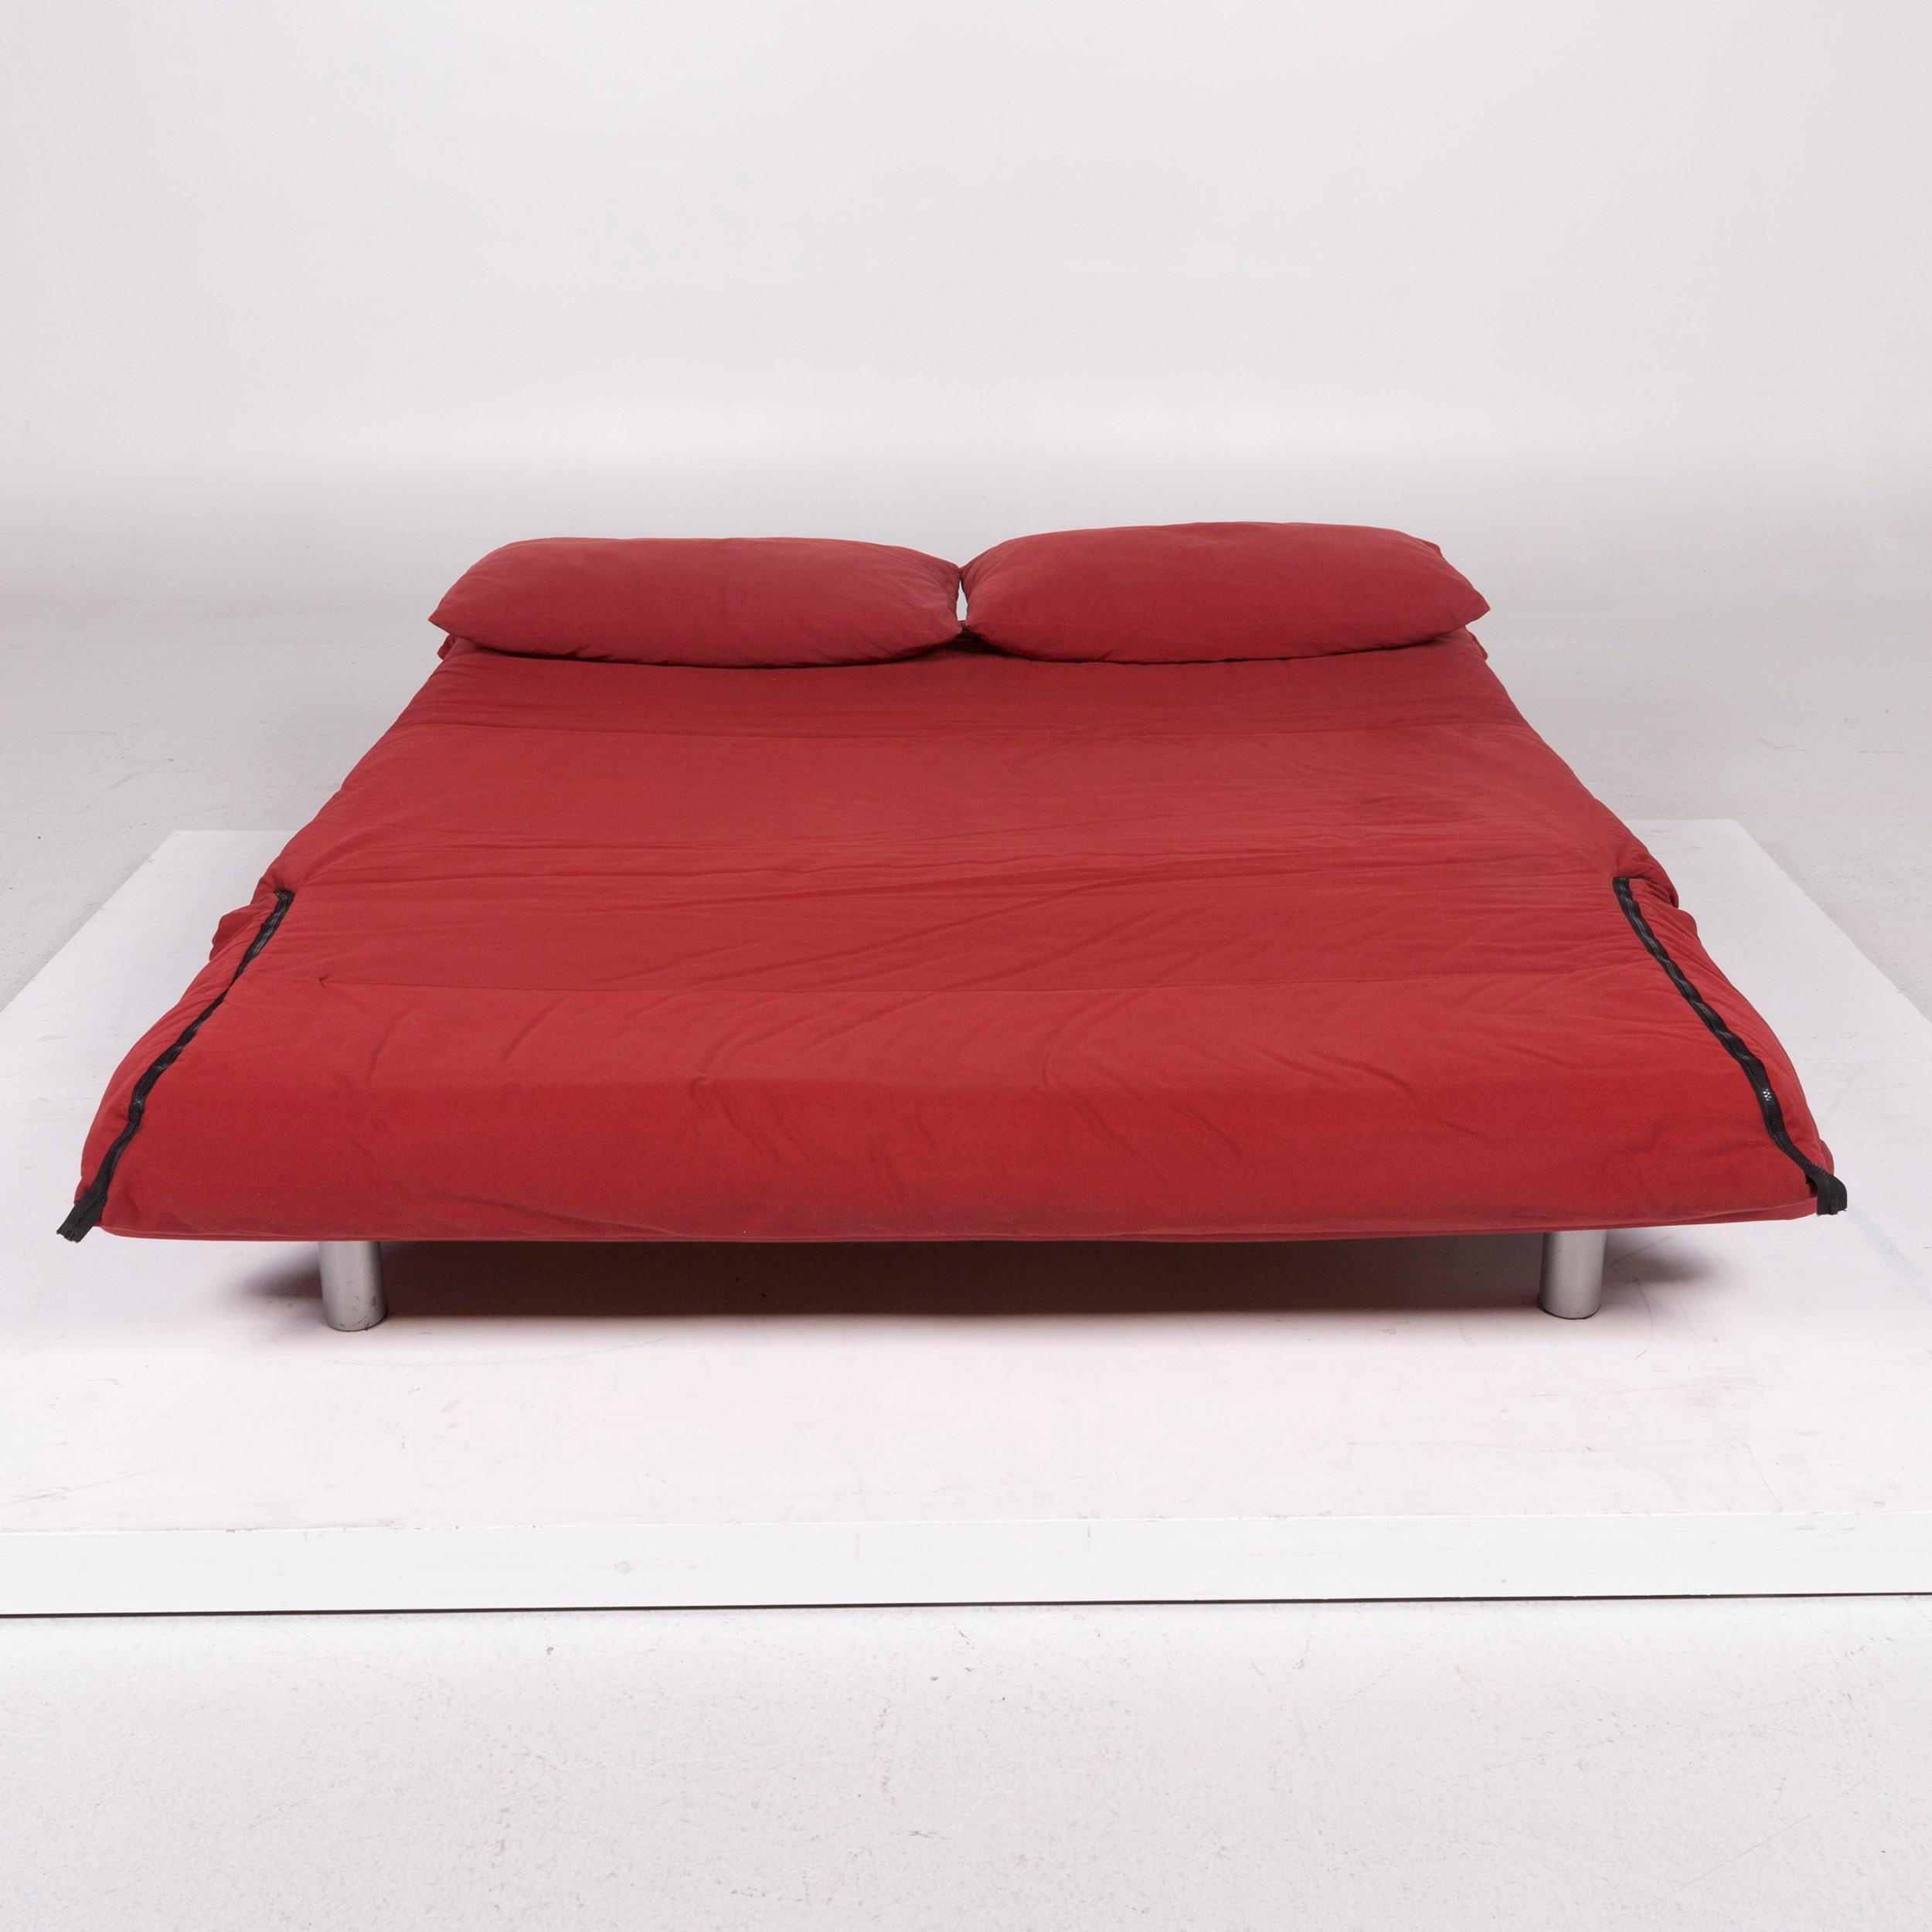 We bring to you a Ligne Roset Multy fabric sofa red two-seat sleeping function.


 Product, measurements in centimeters:
 

Depth 101
Width 166
Height 81
Seat-height 41
Seat-depth 66
Seat-width 166
Back-height 40.


 